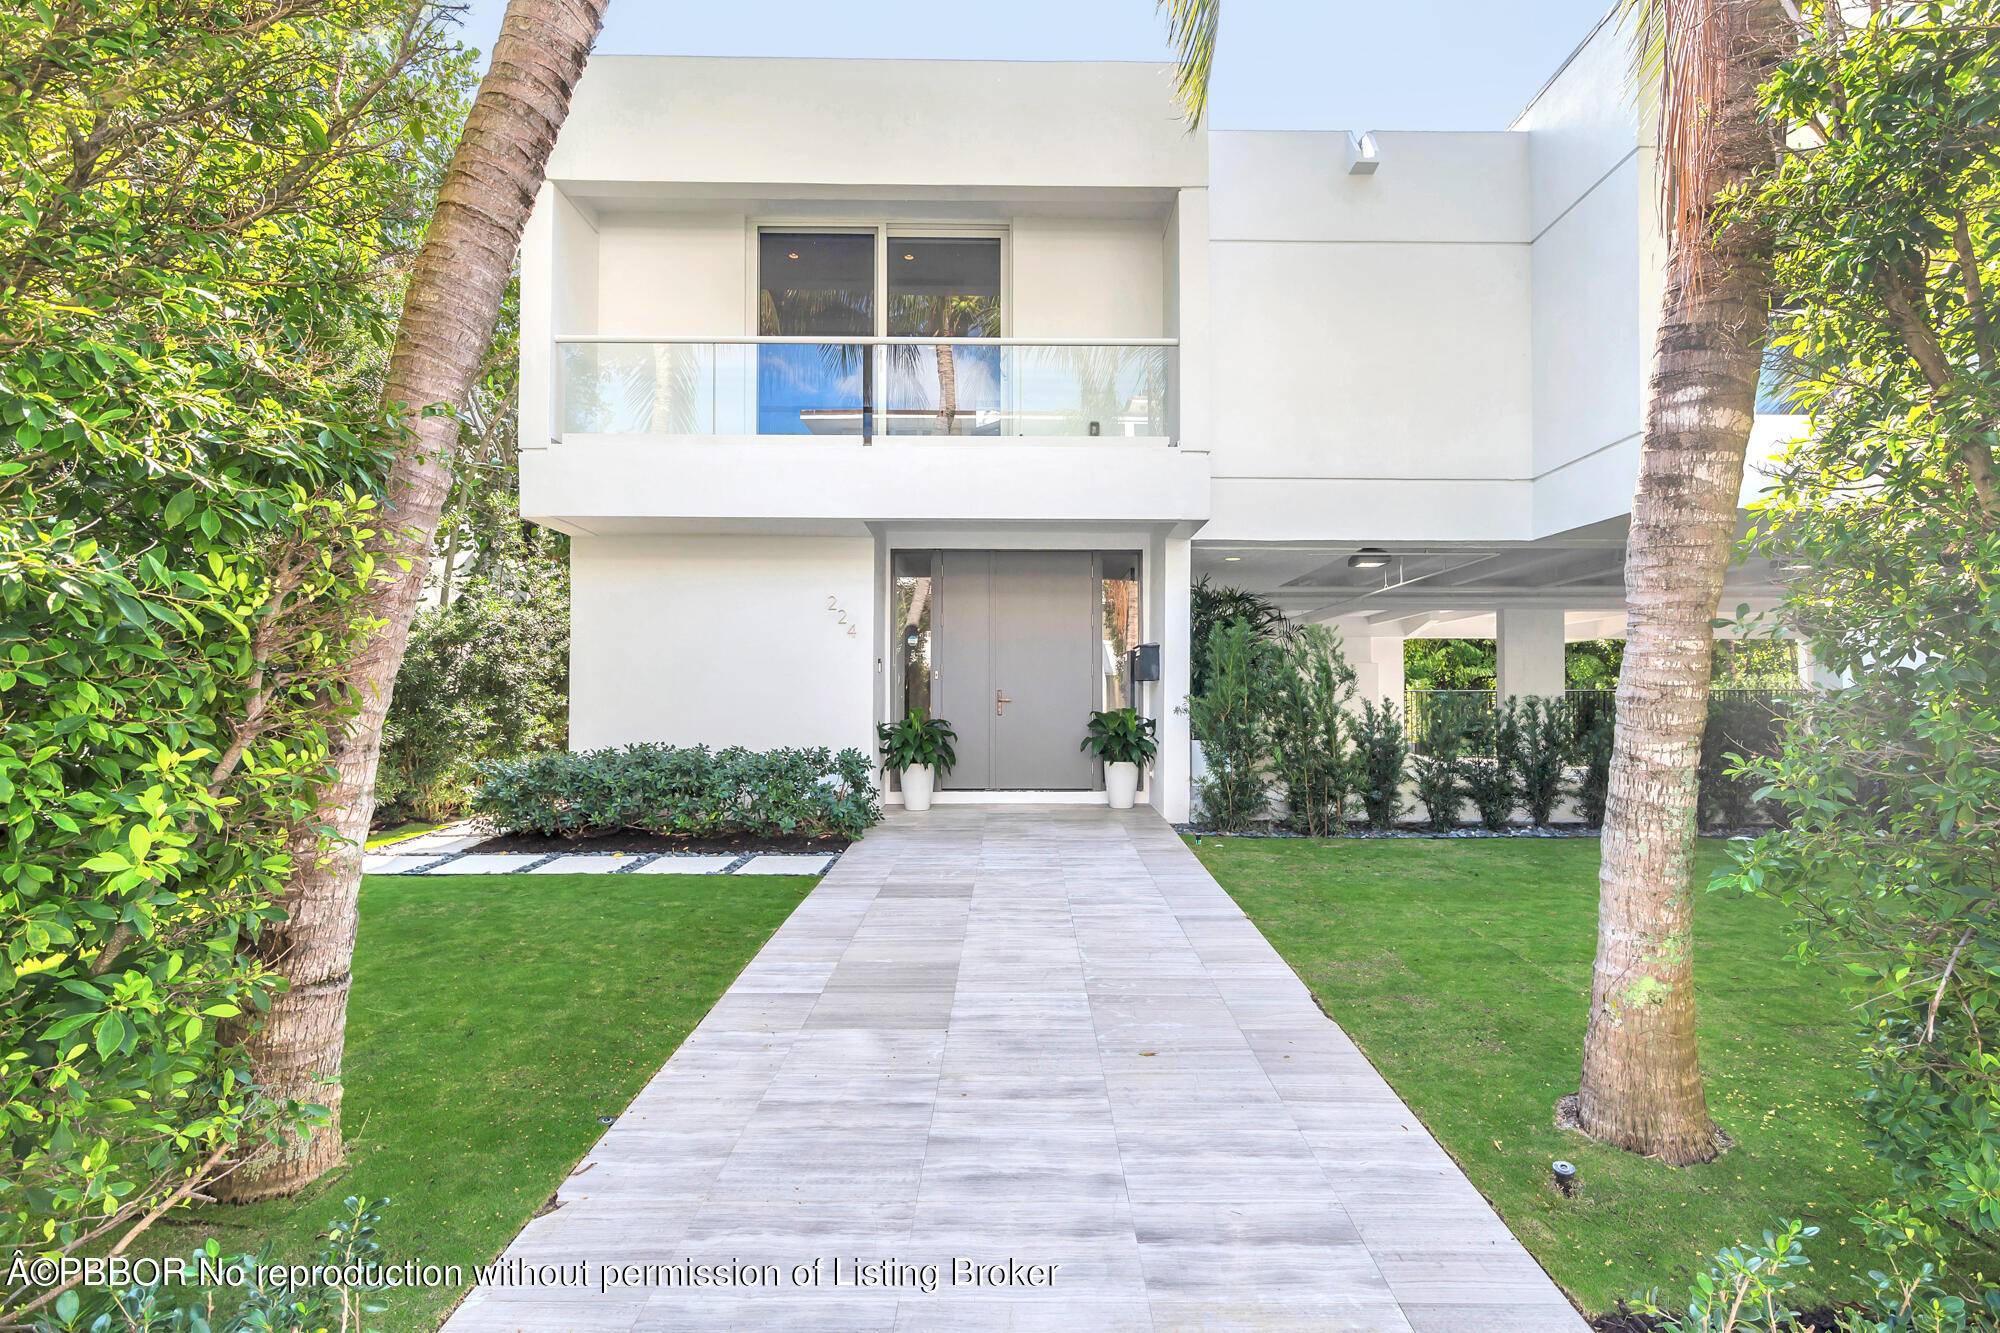 Nestled in the heart of town, this exquisite modern residence spans over 6, 428 square feet, boasting four bedrooms and four and a half baths.